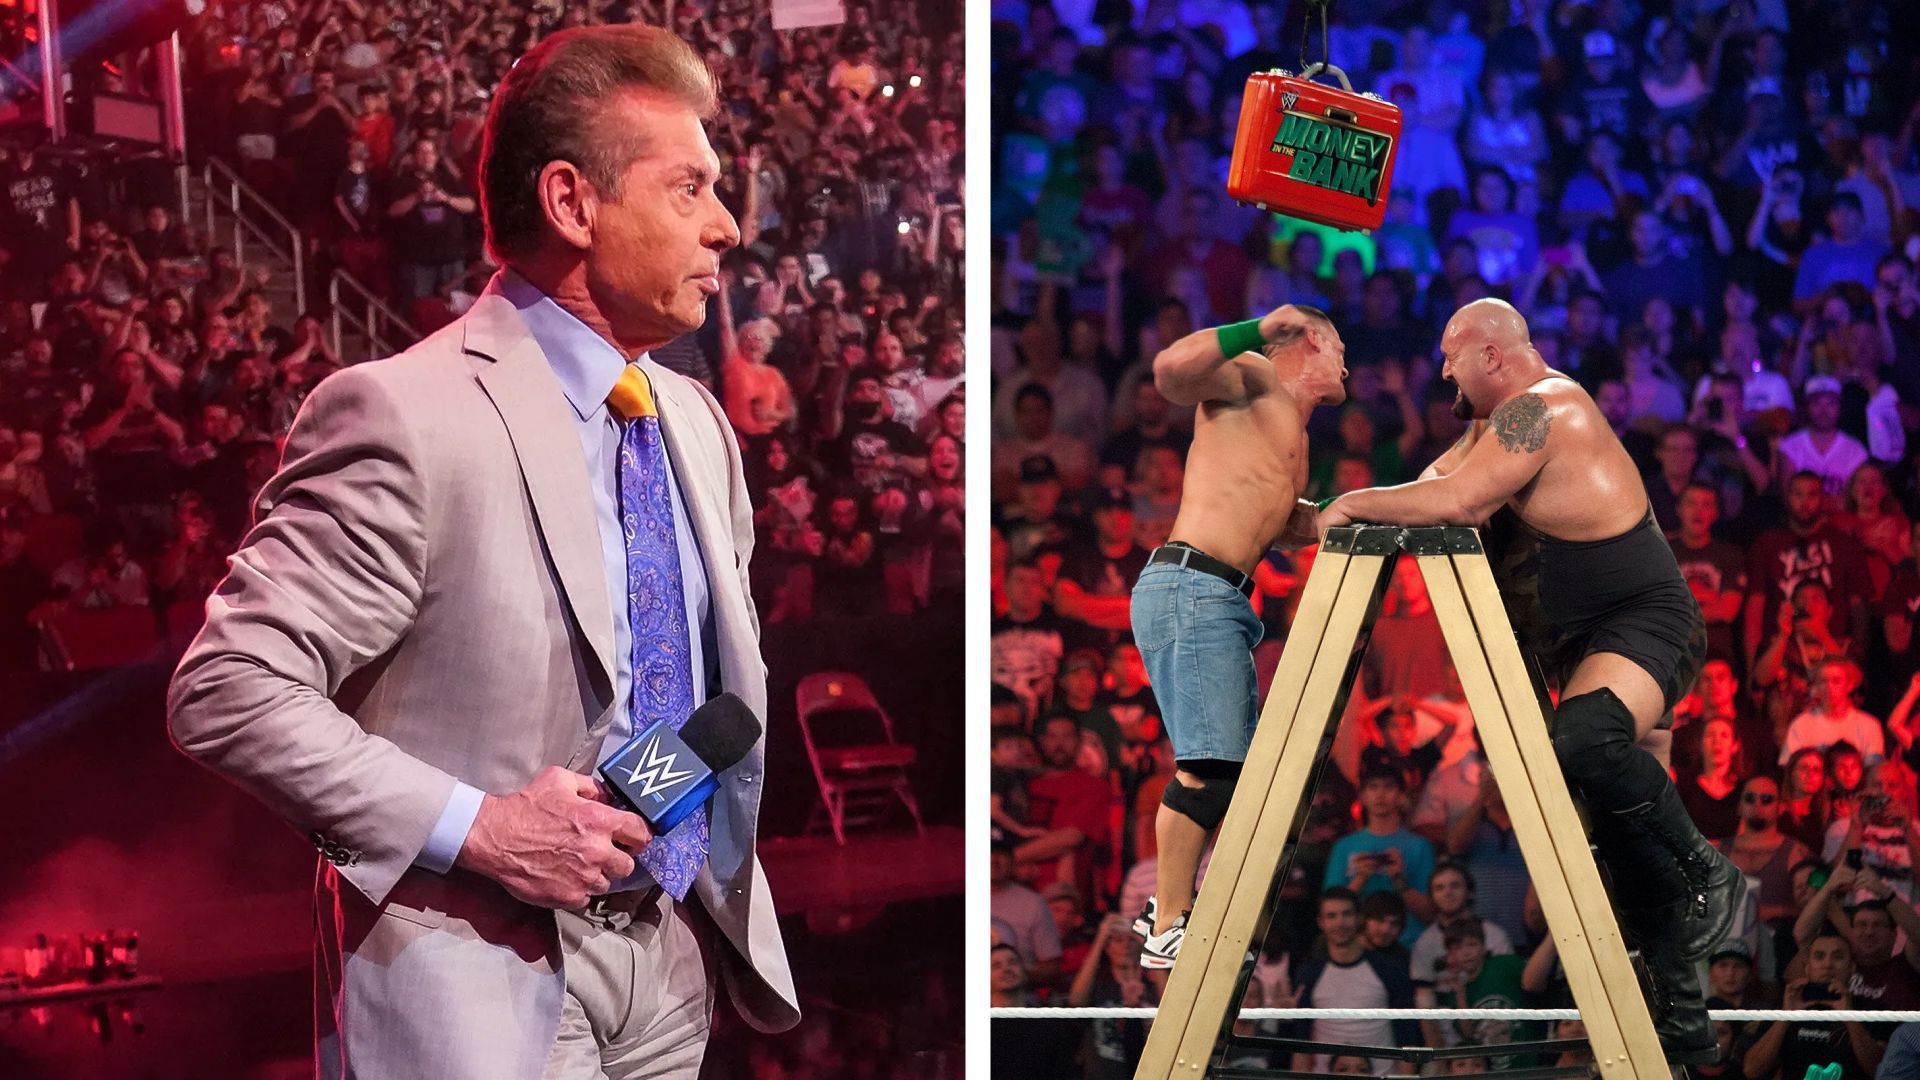 Many memorable moments took place this week in WWE history